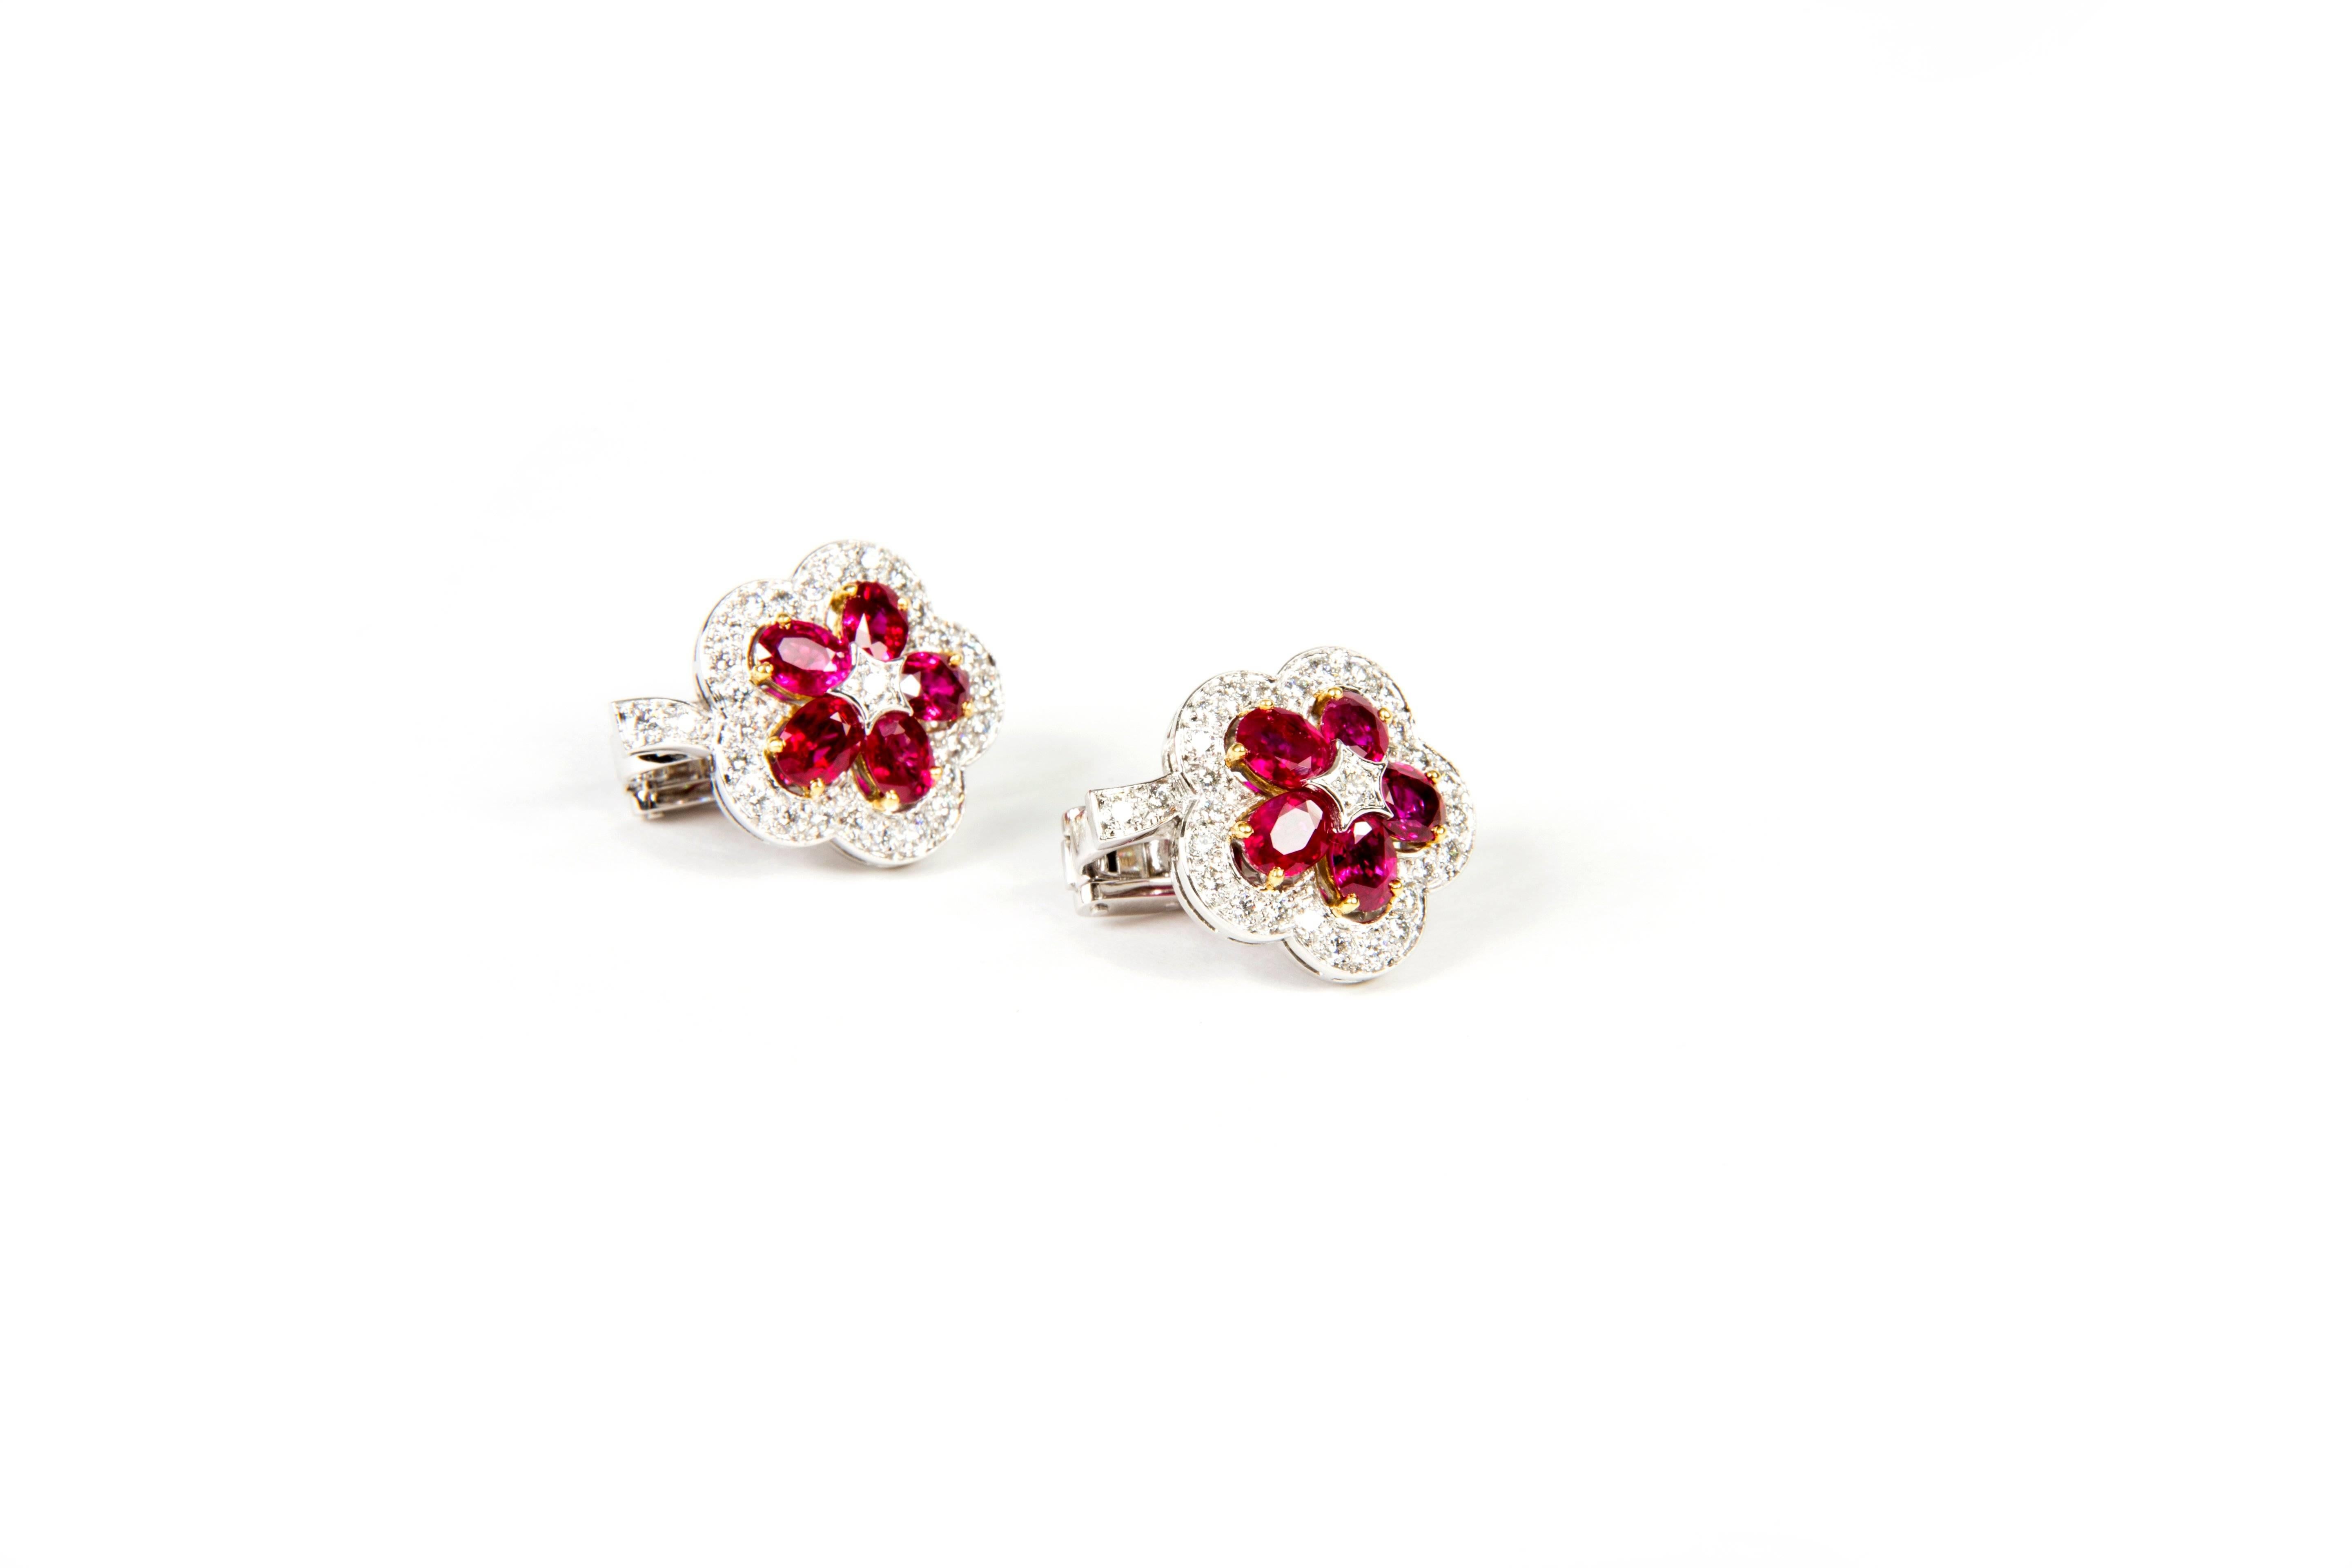 Rubies and Diamond Earrings 
10 rubies 3.83 cts
diamonds 0.76 cts
18k whitegold

earrings come with clips and studs/ either can be removed upon request without charge
